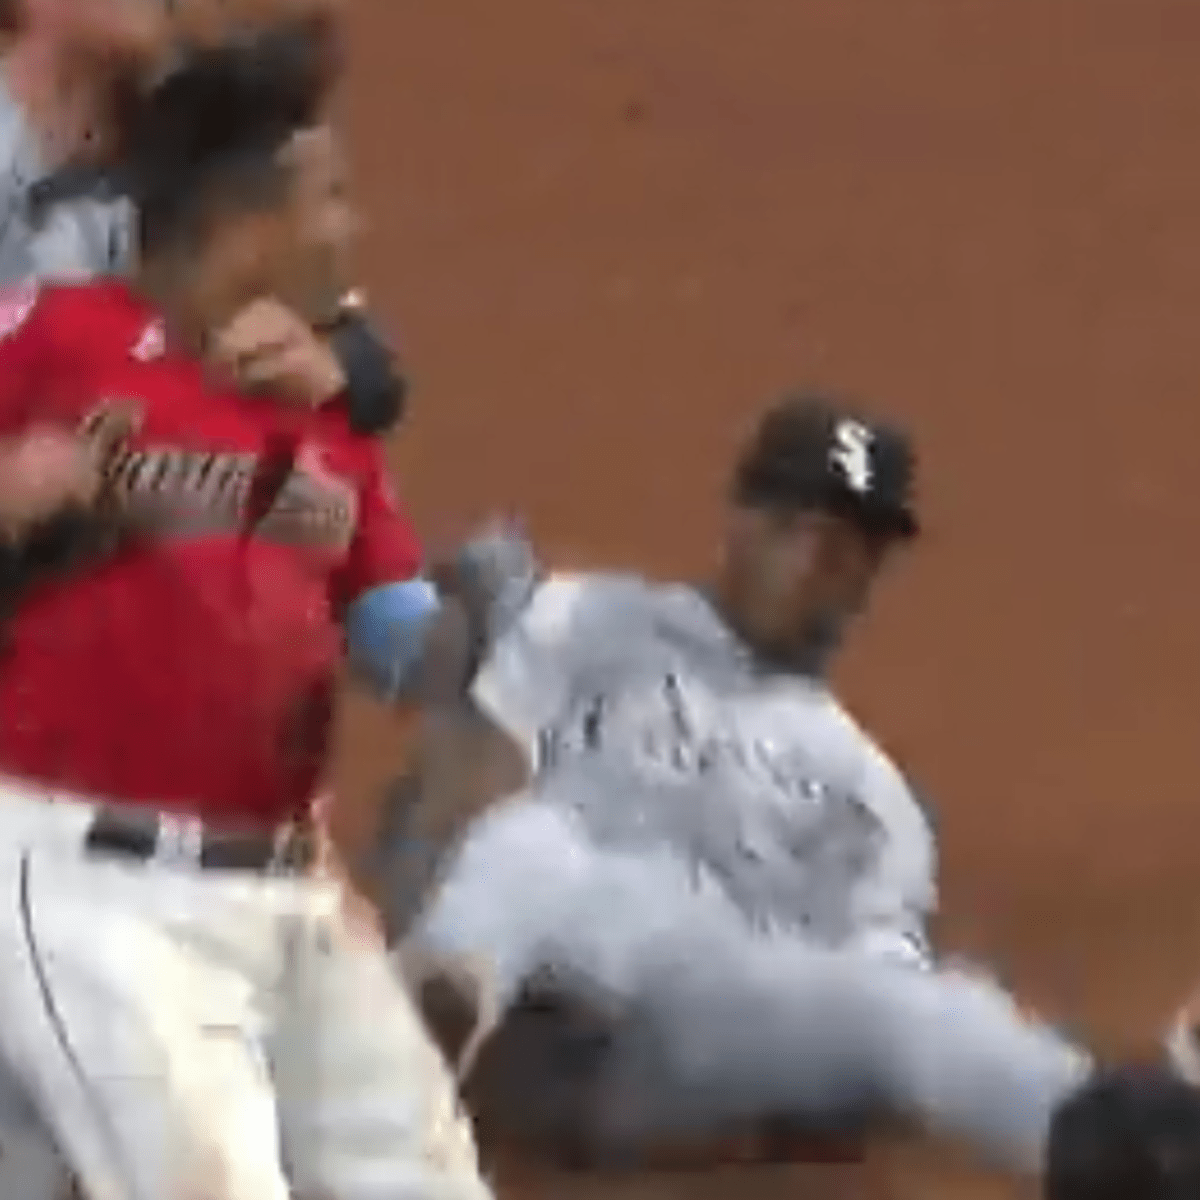 Chicago White Sox' Tim Anderson Gets Knocked Out By Right Hook